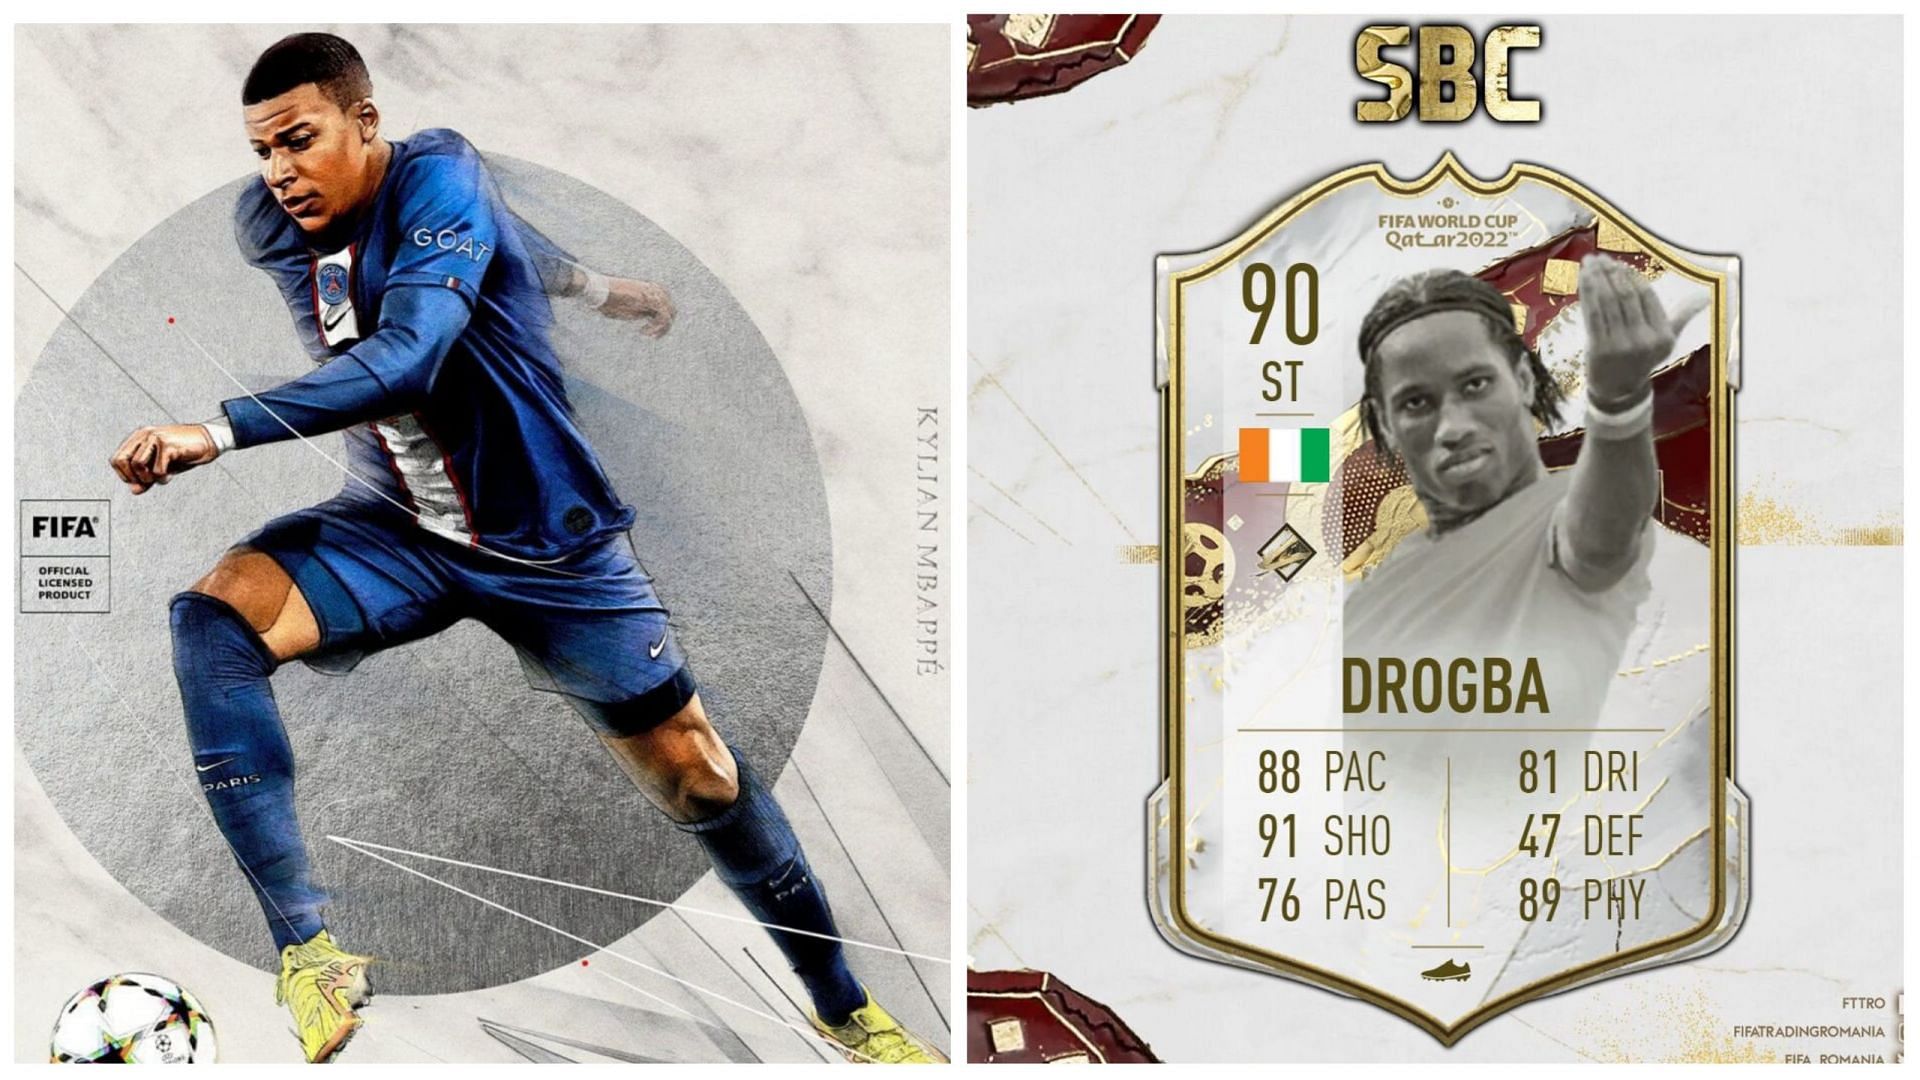 FUT WC Icon Didier Drogba SBC is set to come to the Ultimate Team (Images via FIFA 23 and FifaTradingRomania)